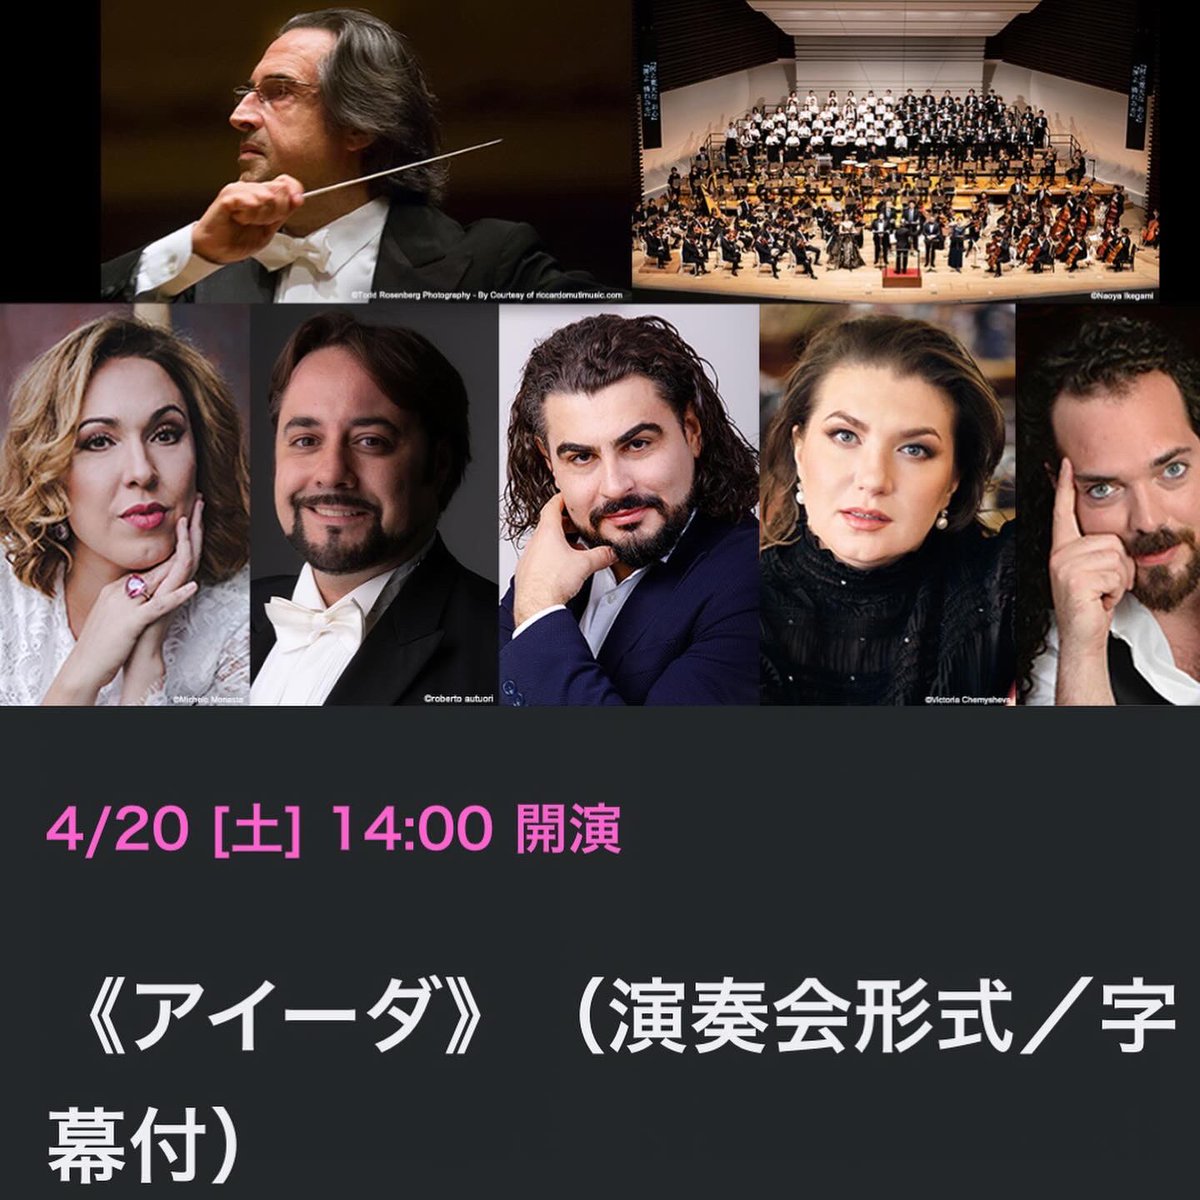 Who wants to see Aida in concert conducted by Riccardo Muti with a incredible cast ? Live streaming tomorrow ! 💋 Link harusailive.jp/?sortType=date 🕕 7 am Europe 🕝 2 am Mercosur #mariajosesiri #aida #verdi #riccardomuti #tokyo #streaming #lovemyjob